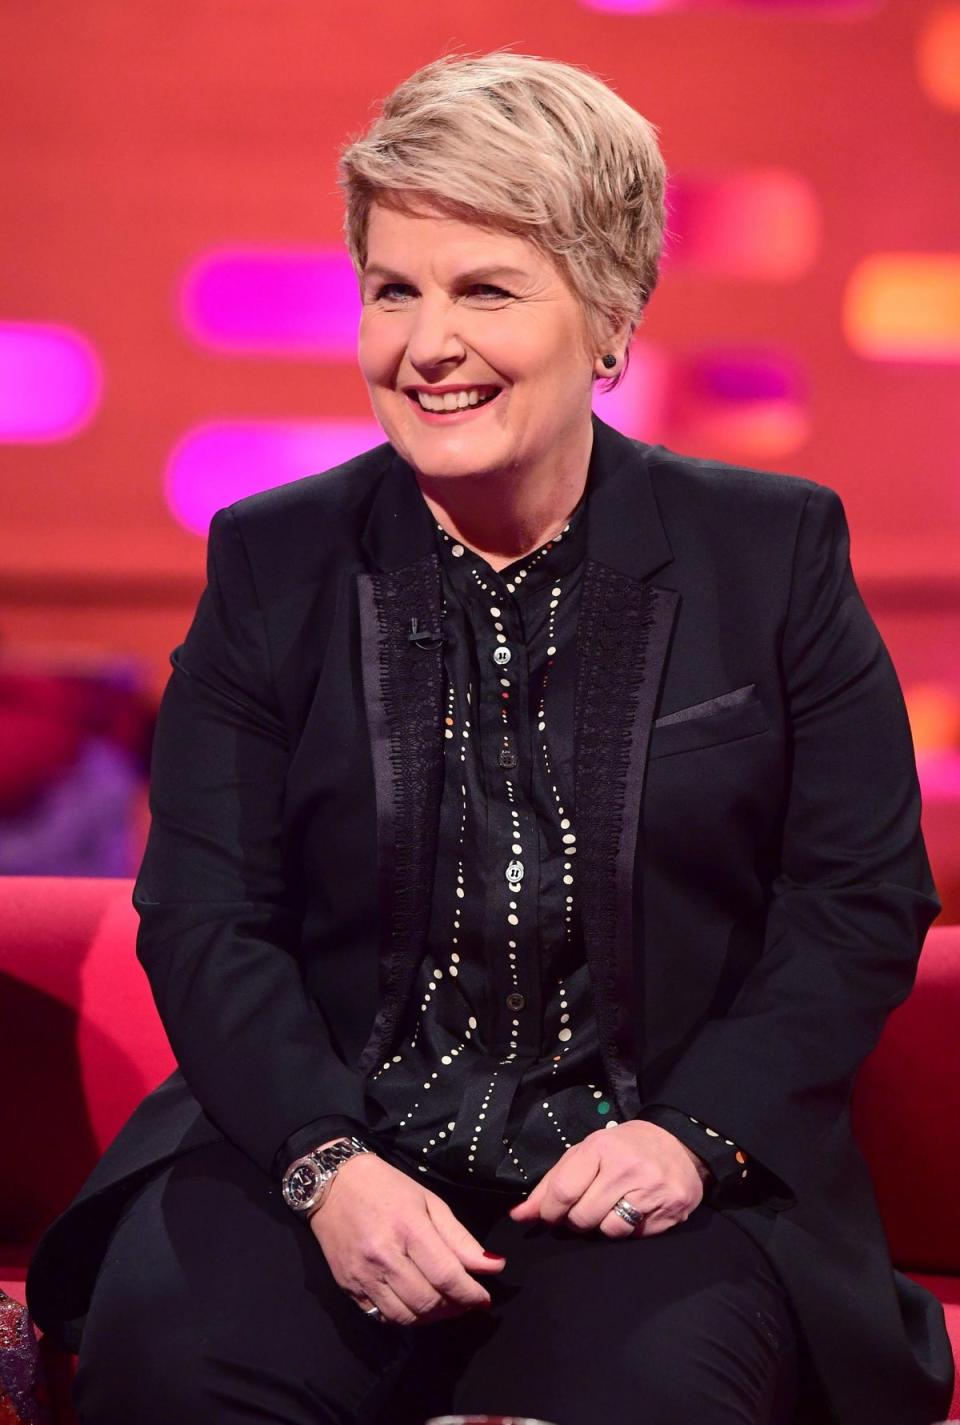 Sandi Toksvig is currently the bookies favourite to replace Jeremy Paxman on University Challenge (BBC)